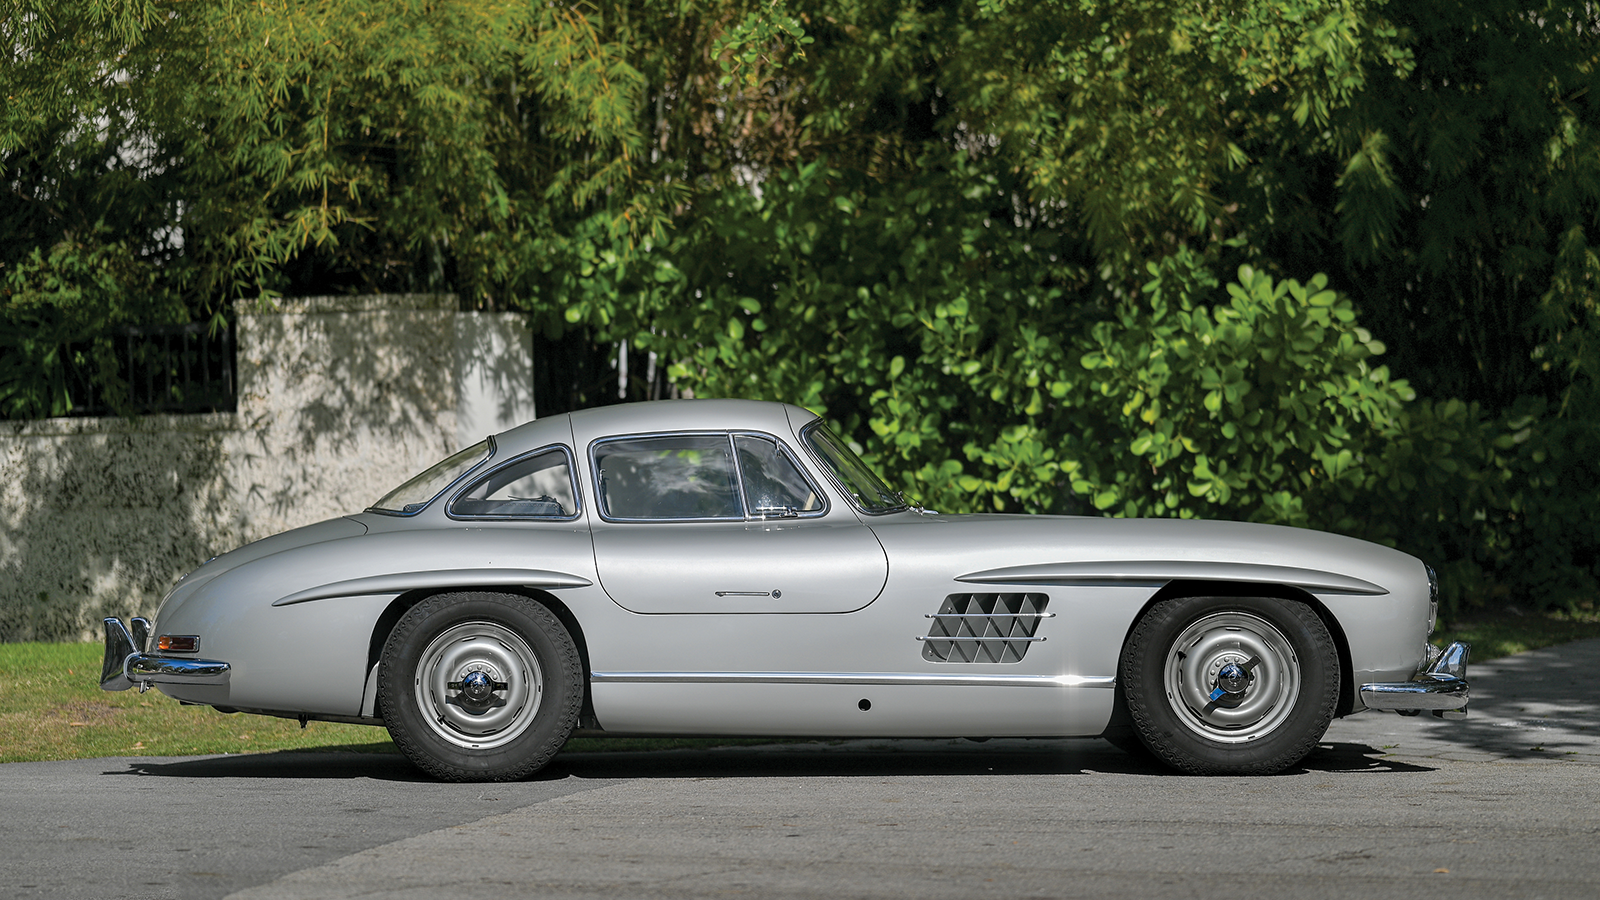 The 20 most expensive classics sold at Scottsdale 2020